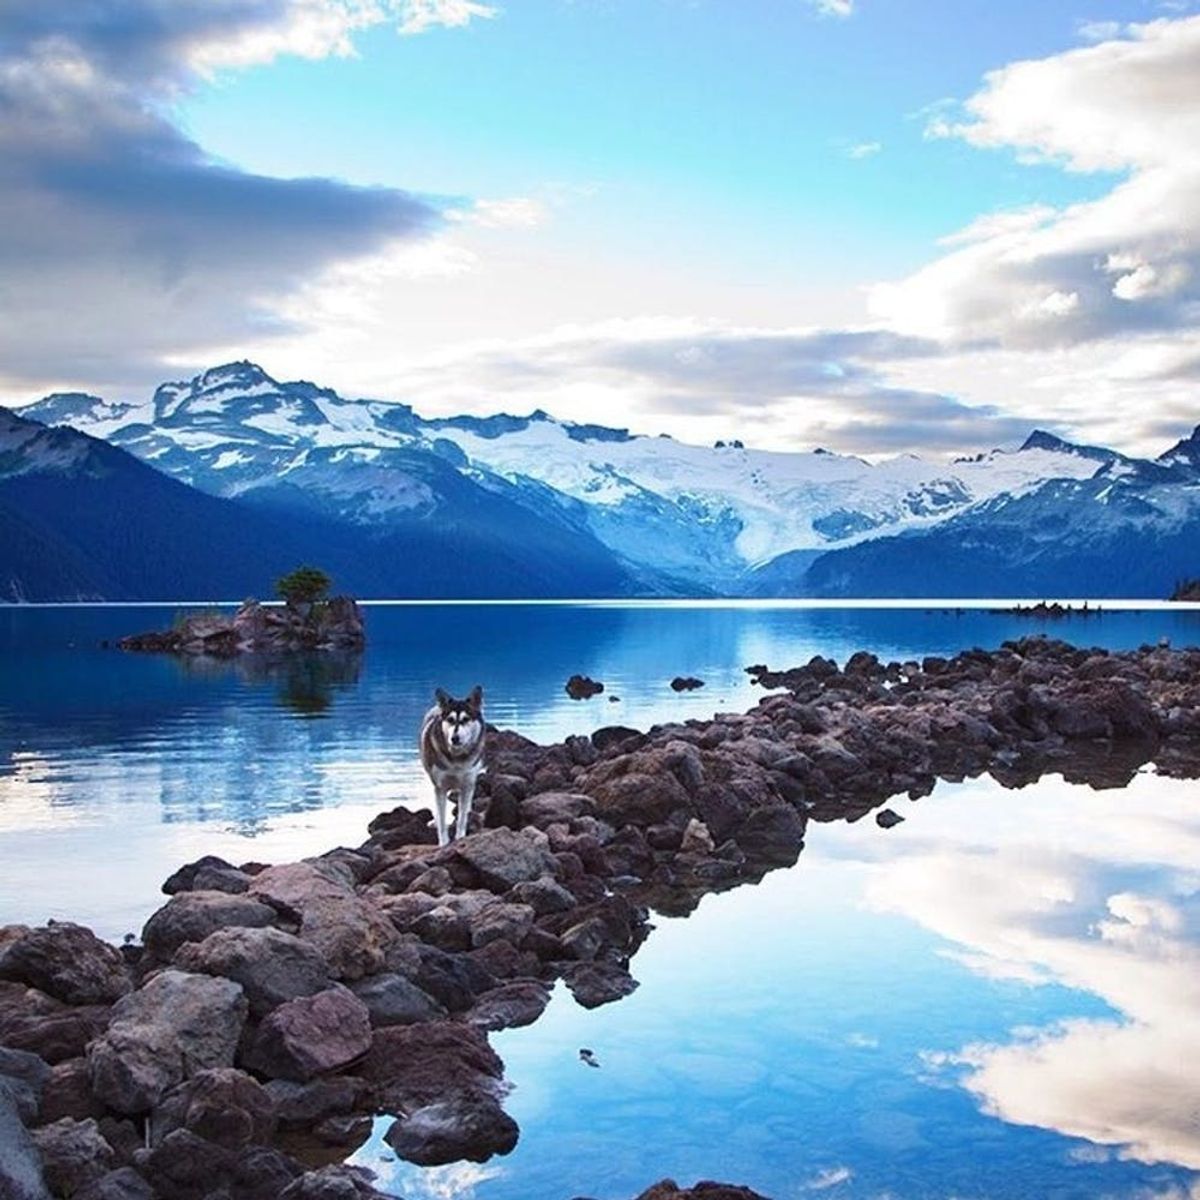 12 Adventure Instagrammers Who Will Inspire You to Get Outdoors